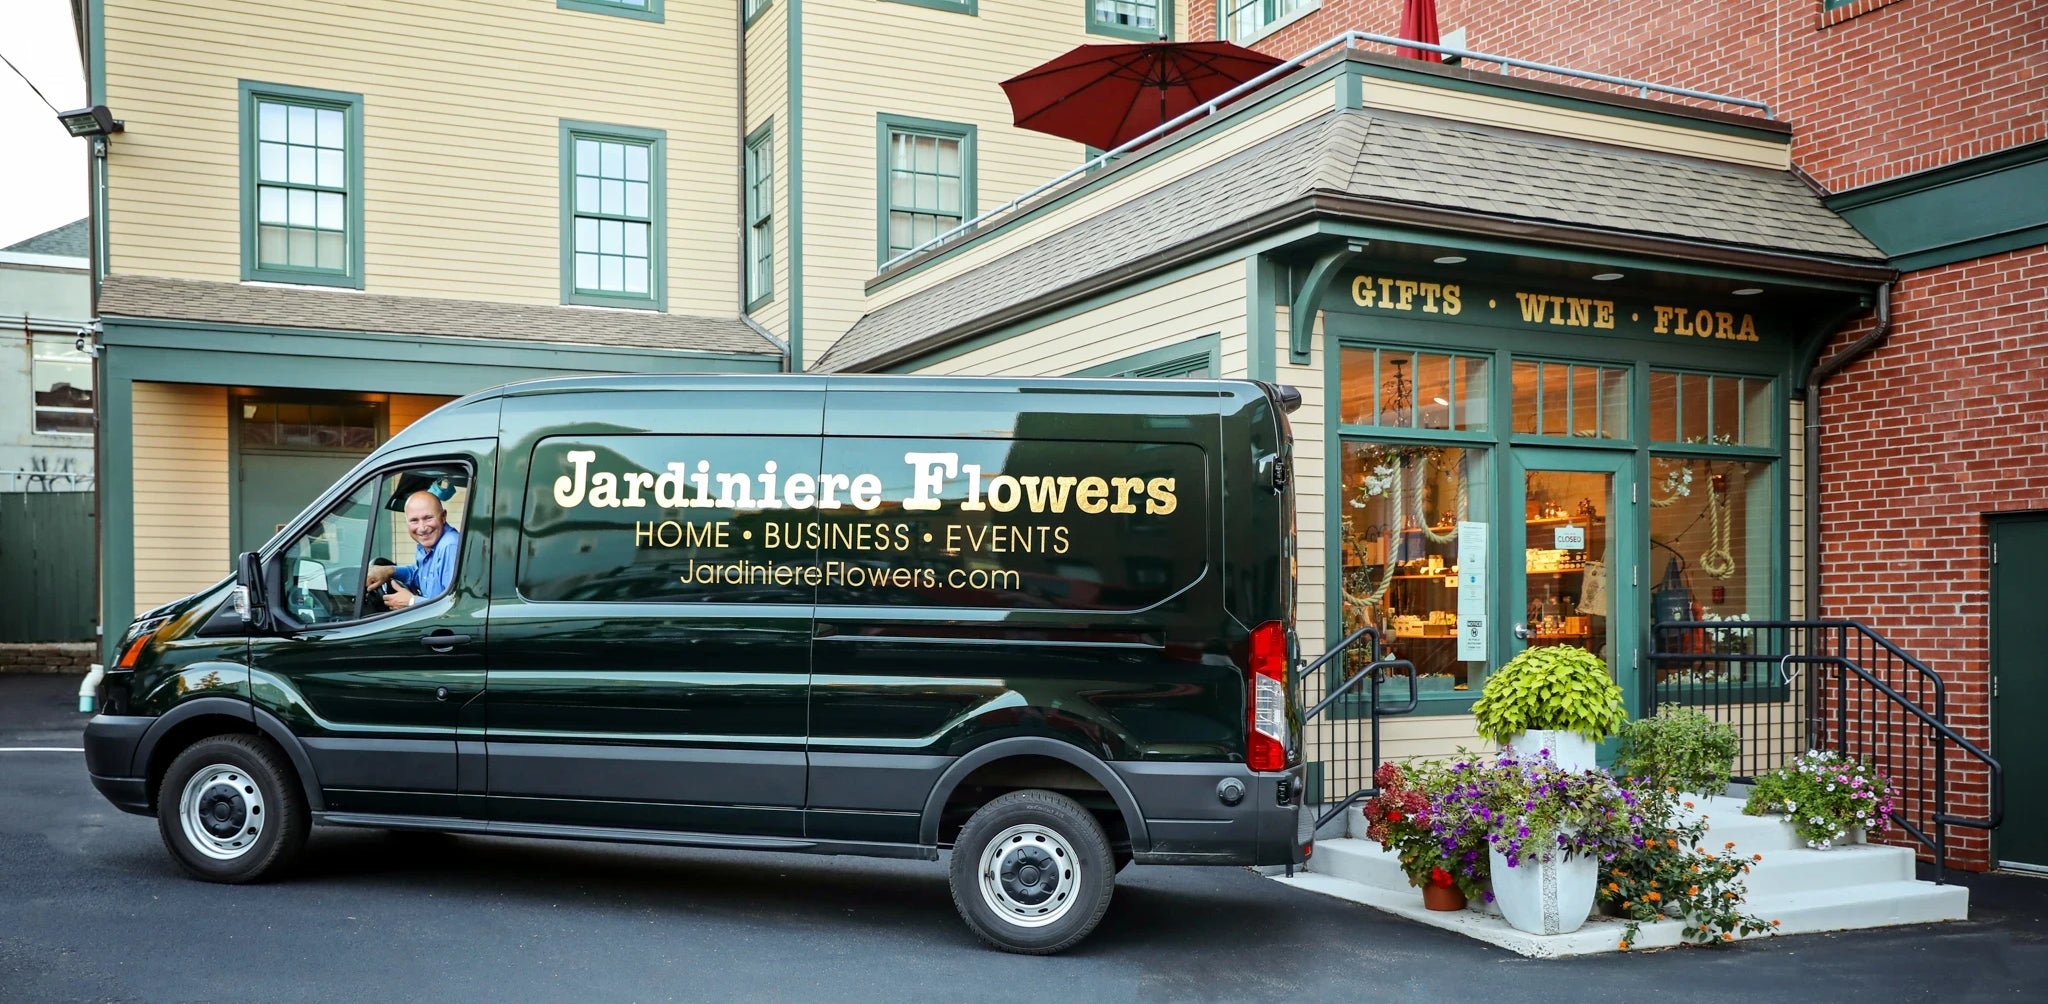 Vinny Colella of Jardiniere Flowers, Portsmouth, New Hampshire. Flowering the Seacoast. Jardiniere Flowers is located on Deer Street in Portsmouth and has been flowering the seacoast since 1993. New England Weddings in Maine and New Hampshire and daily delivery to New Hampshire and Maine. New Hampshire's Premier Family-Owned Florist! Voted Best Flowers Shop on the Seacoast 24 years in a row.  